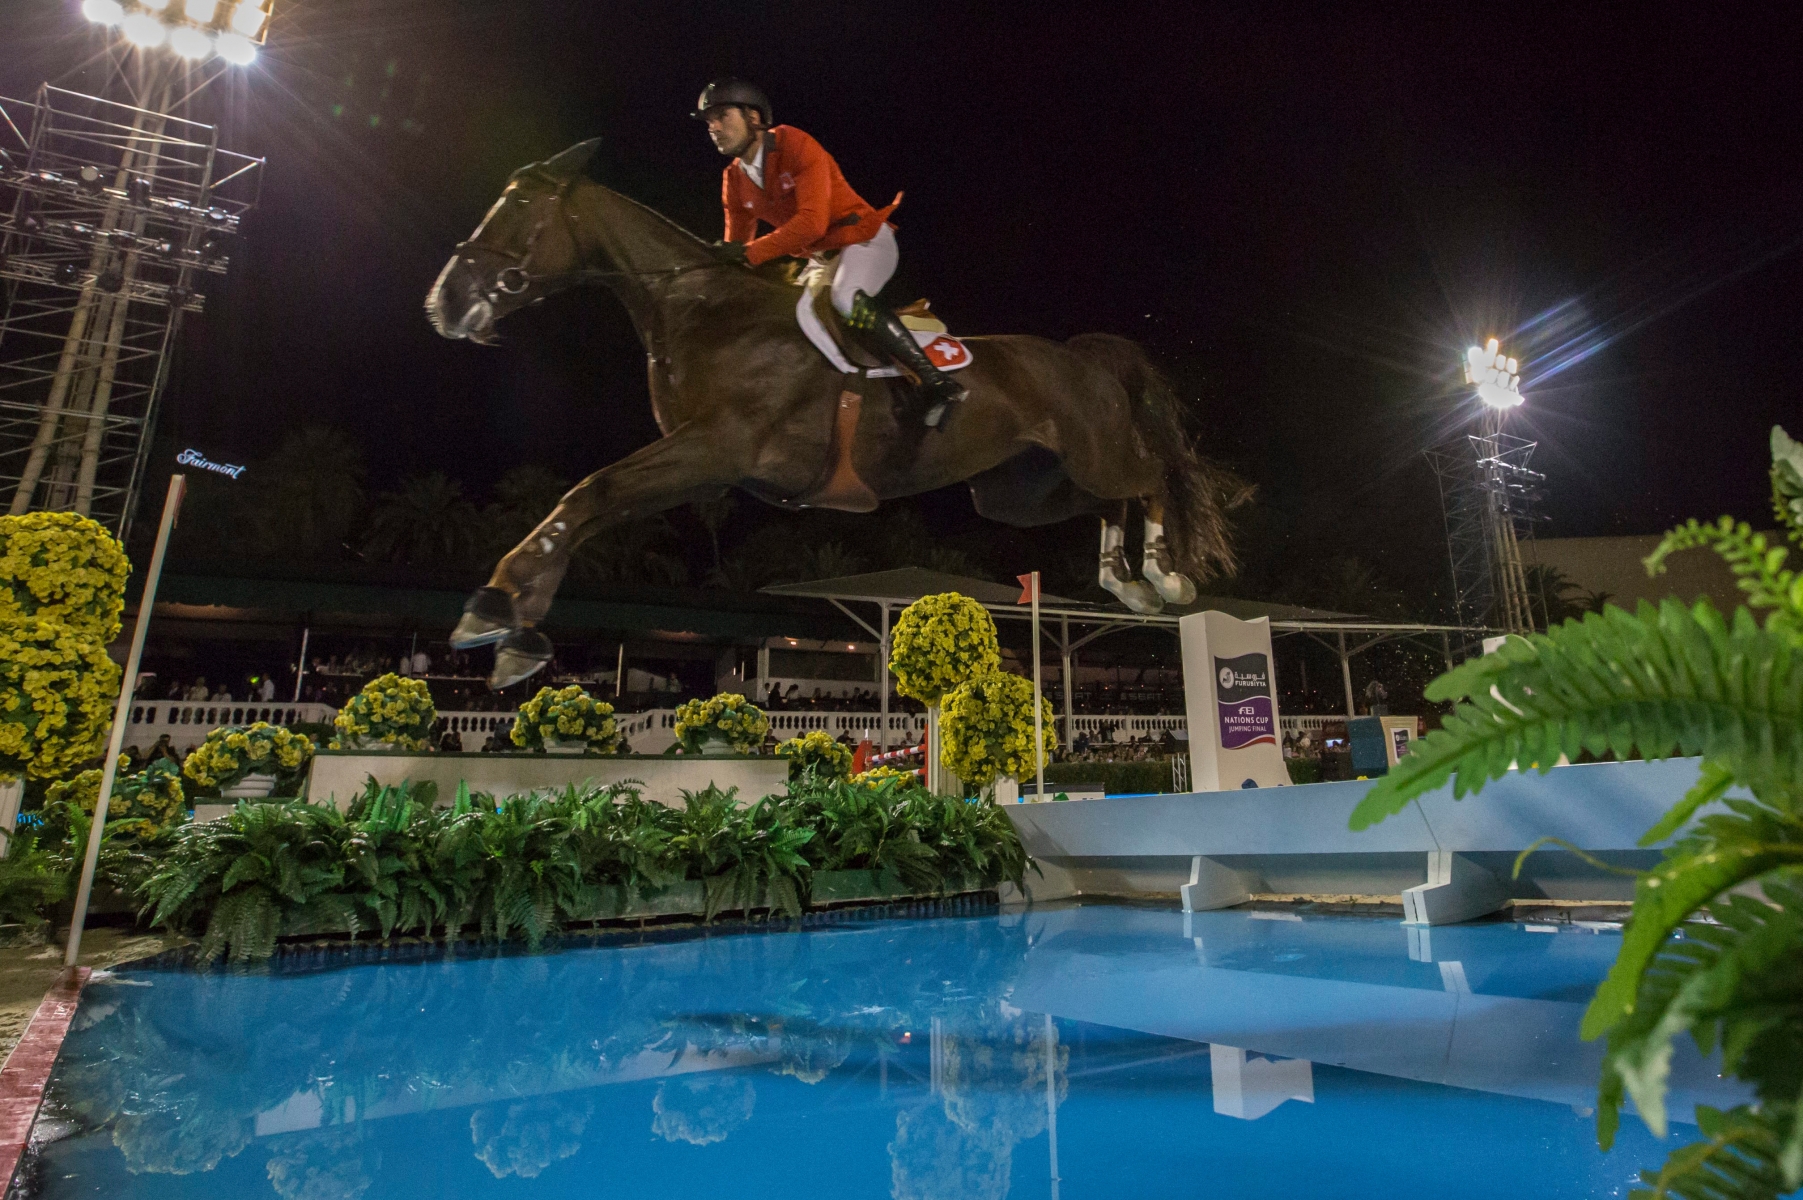 epa05555007 Romain Duguet of Switzerland rides Quorida de Treho over a water jump during the Furusiyya FEI Nations Cup Jumping Final 2016 in Barcelona, Spain, 24 September 2016.  EPA/JIM HOLLANDER SPAIN EQUESTRIAN NATIONS CUP